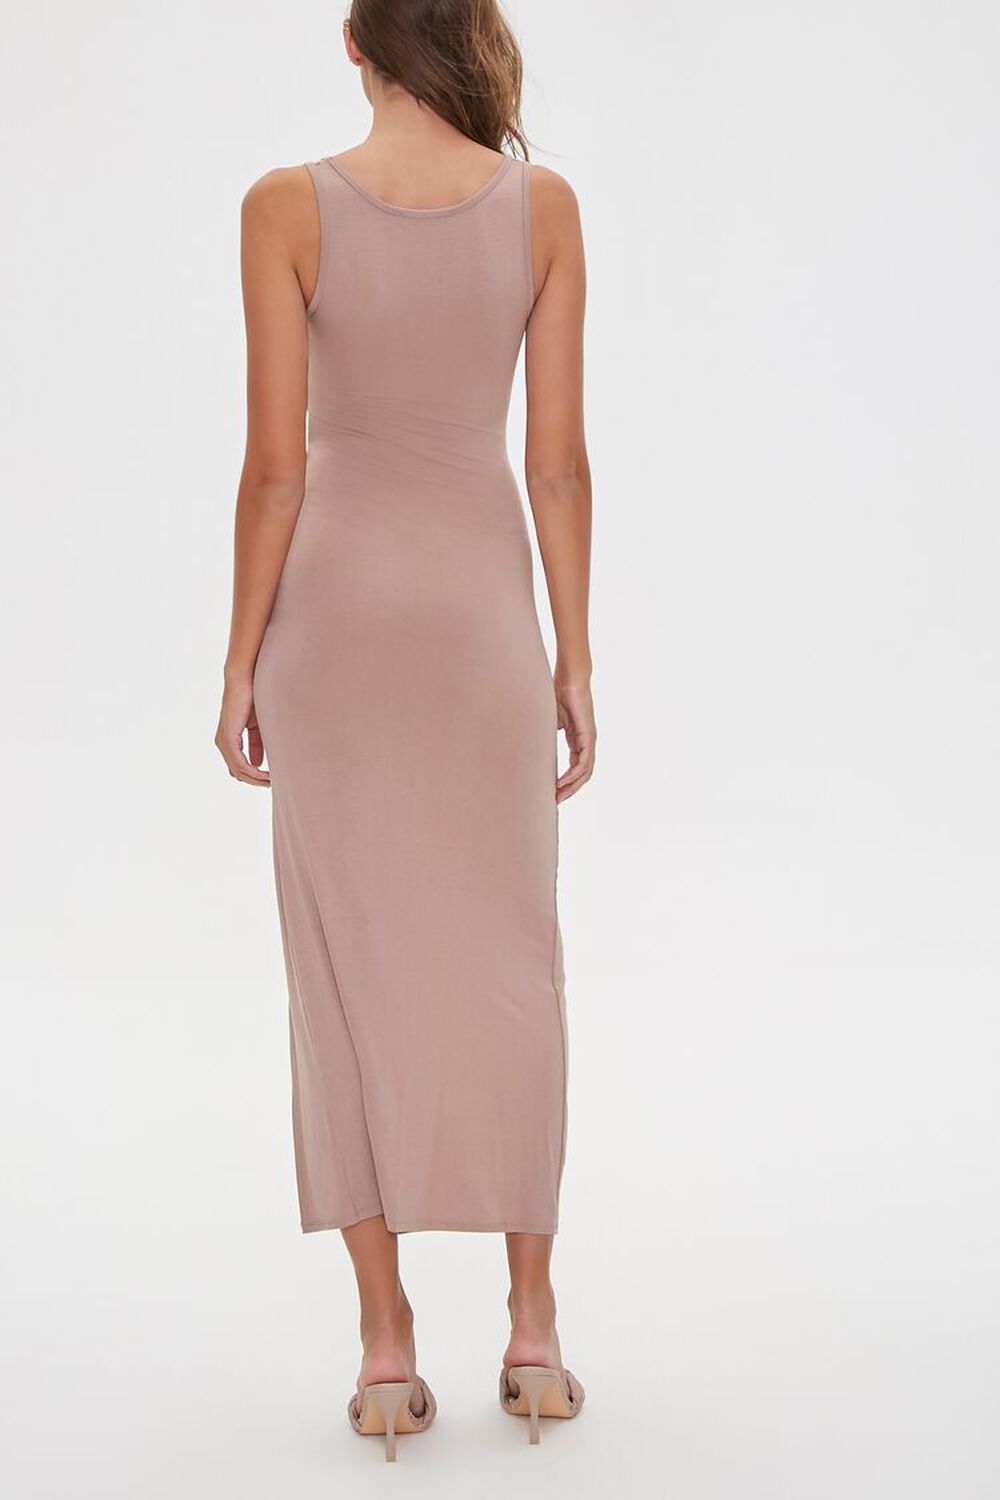 COCOA Ruched Side-Slit Bodycon Dress, image 3